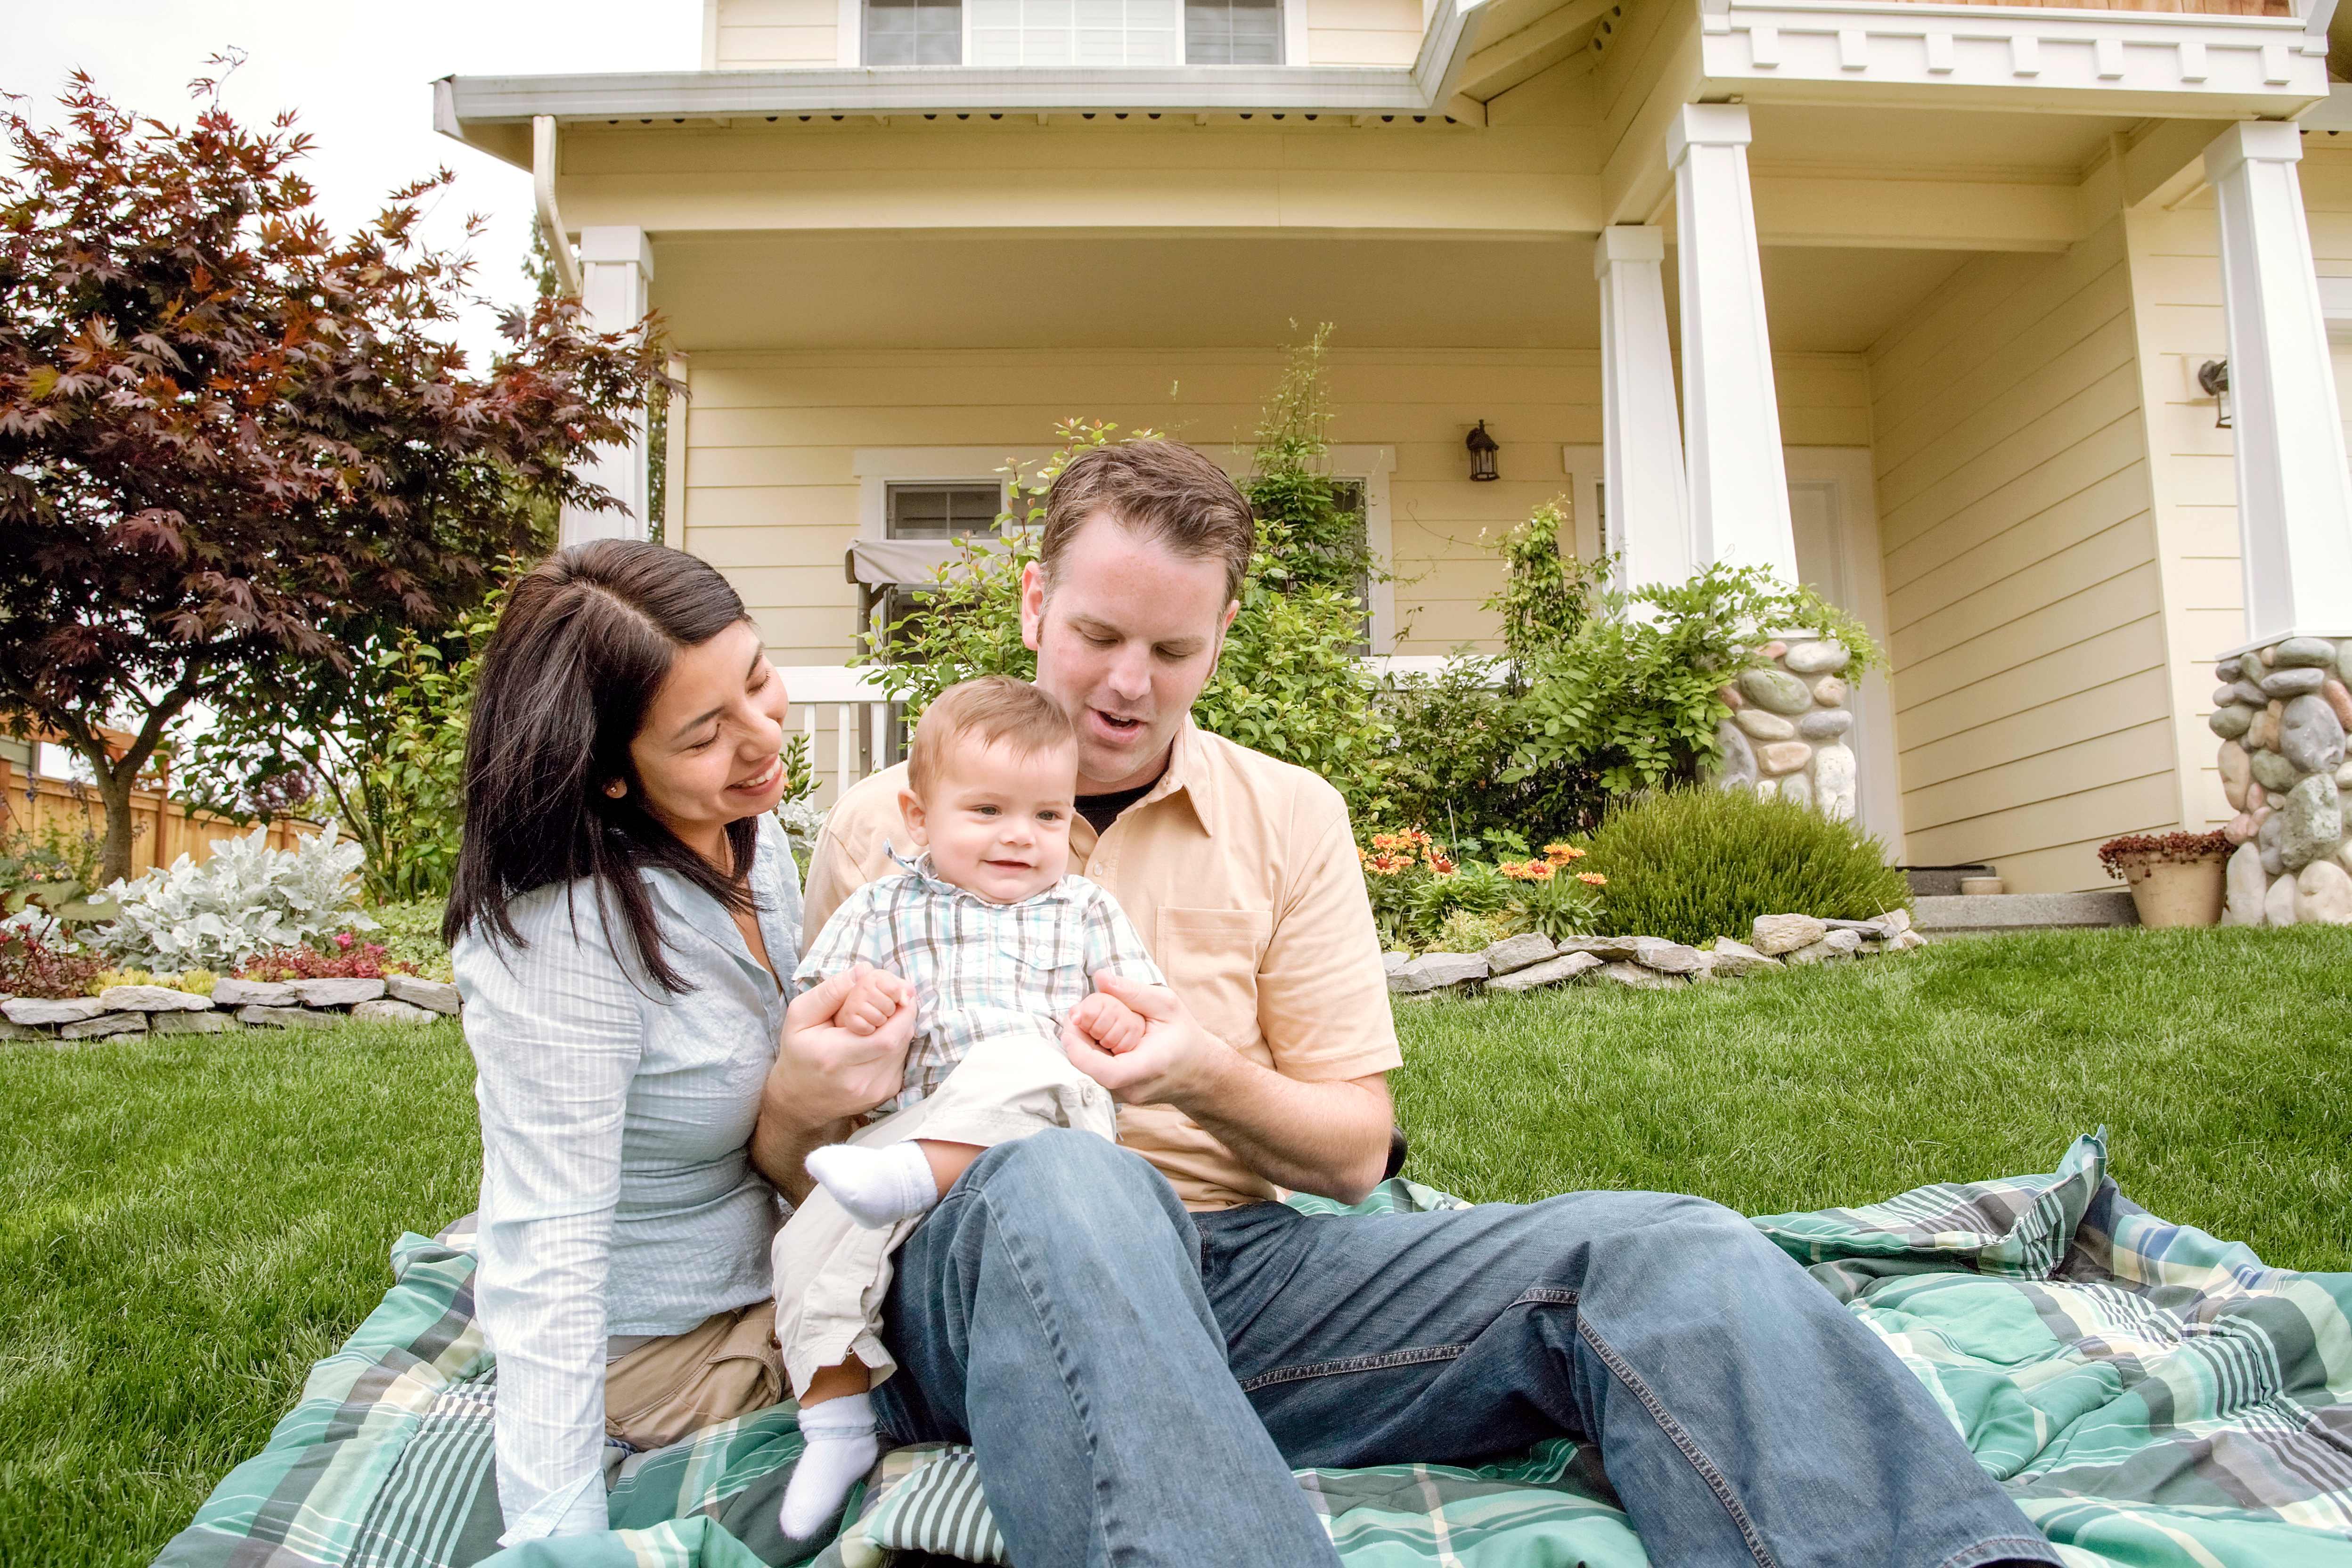 Family with a baby on a picnic blanket in front of a house